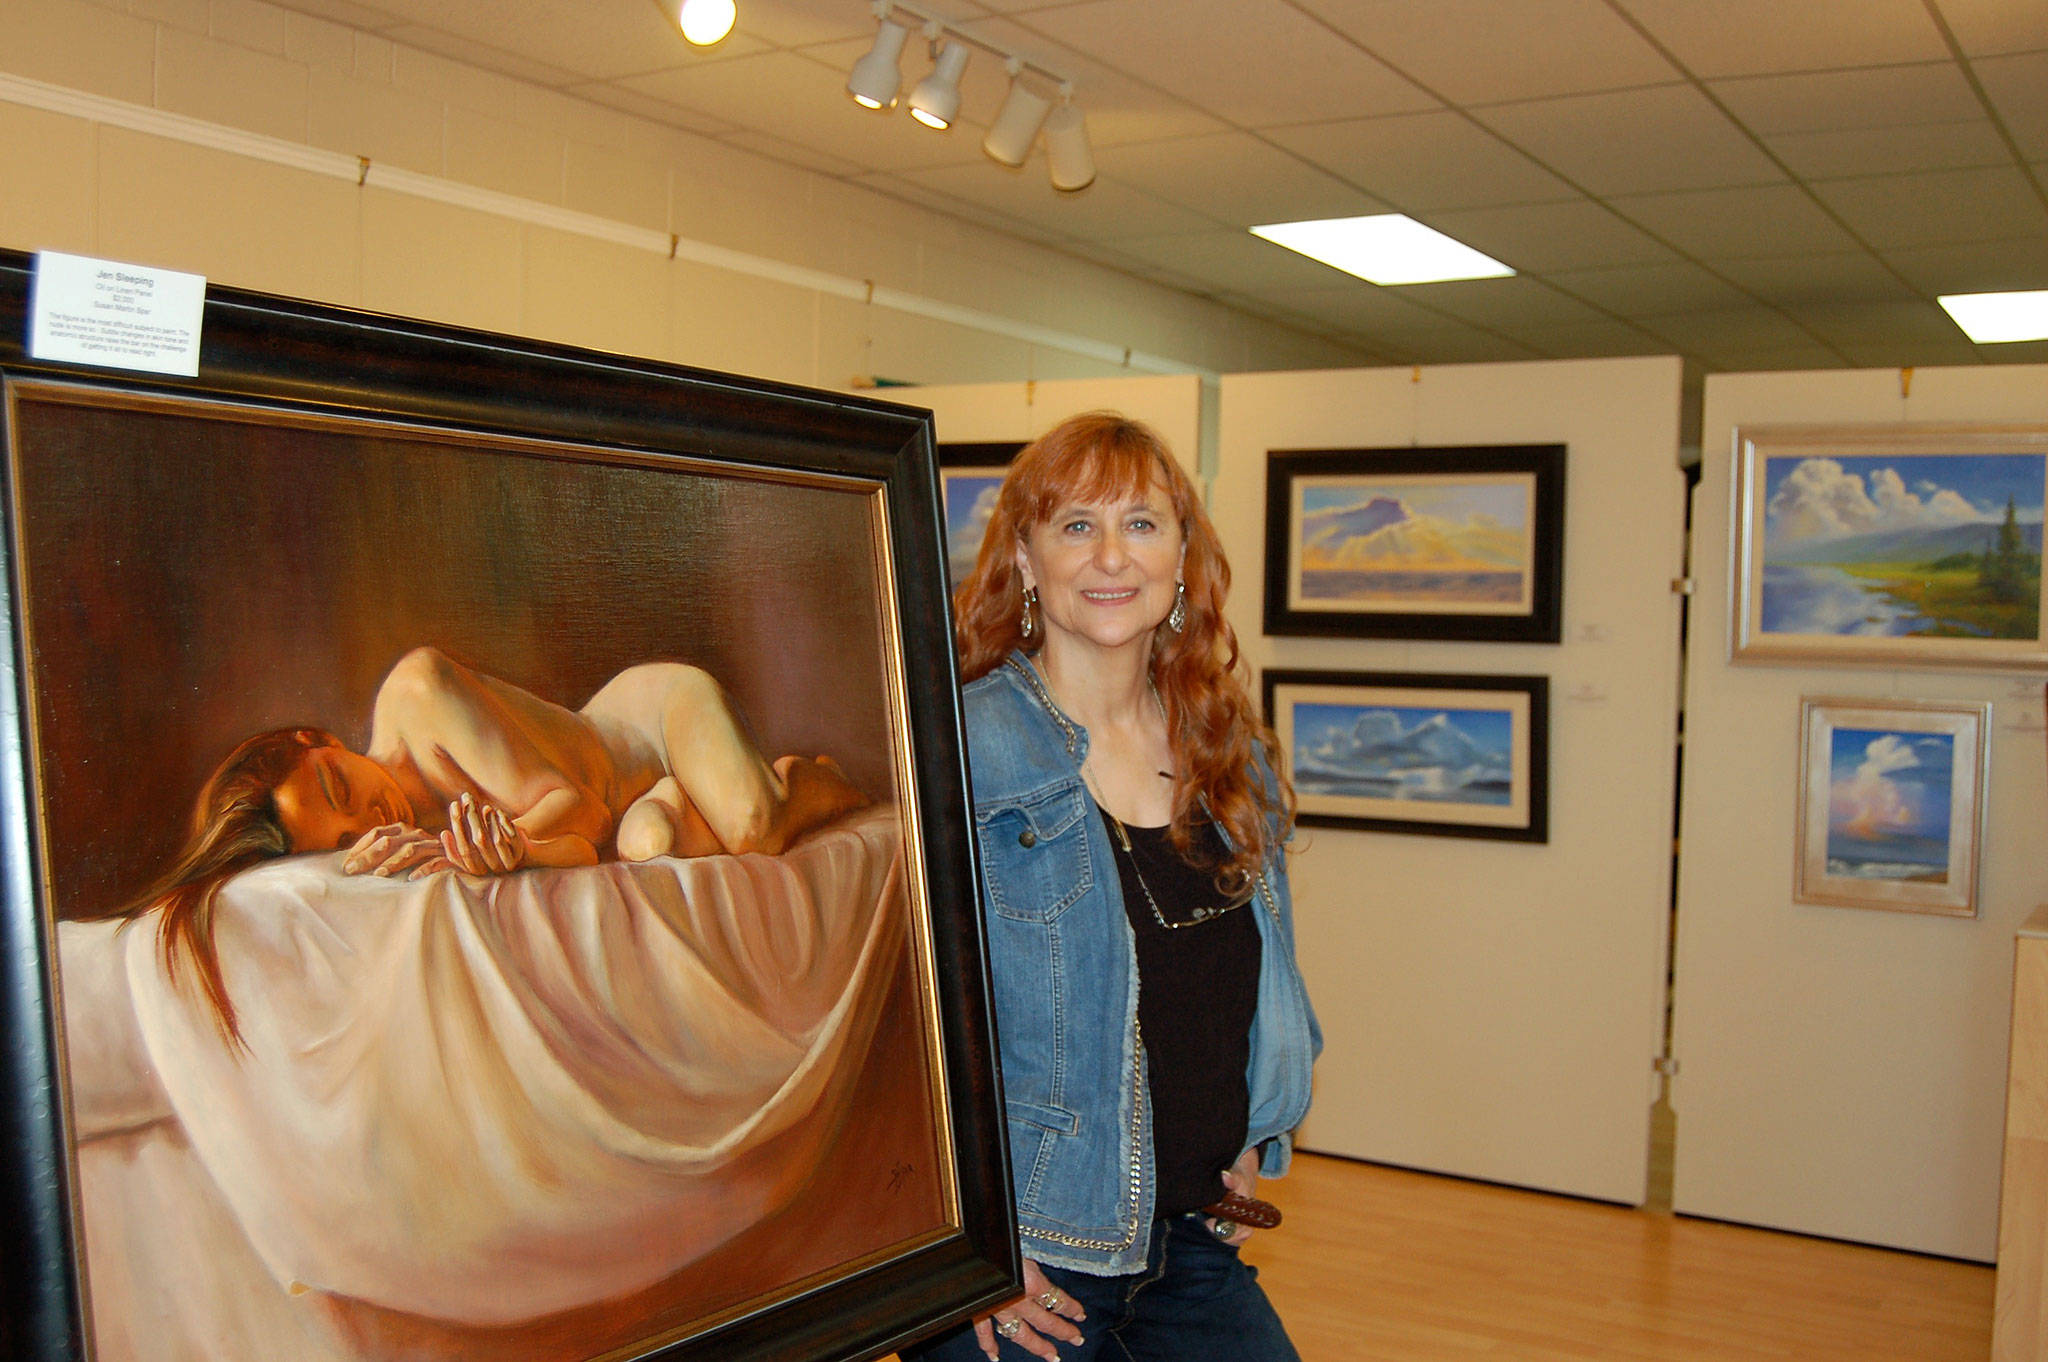 Local artist Susan Spar stands next to her exhibit centerpiece, “Jen Sleeping” on display at her show “People, Places & Things of the Heart” at the Sequim Museum & Arts Center. She will hold an artist demonstration and reception on Saturday, June 17, at the Sequim Museum & Arts Center. Sequim Gazette photo by Erin Hawkins